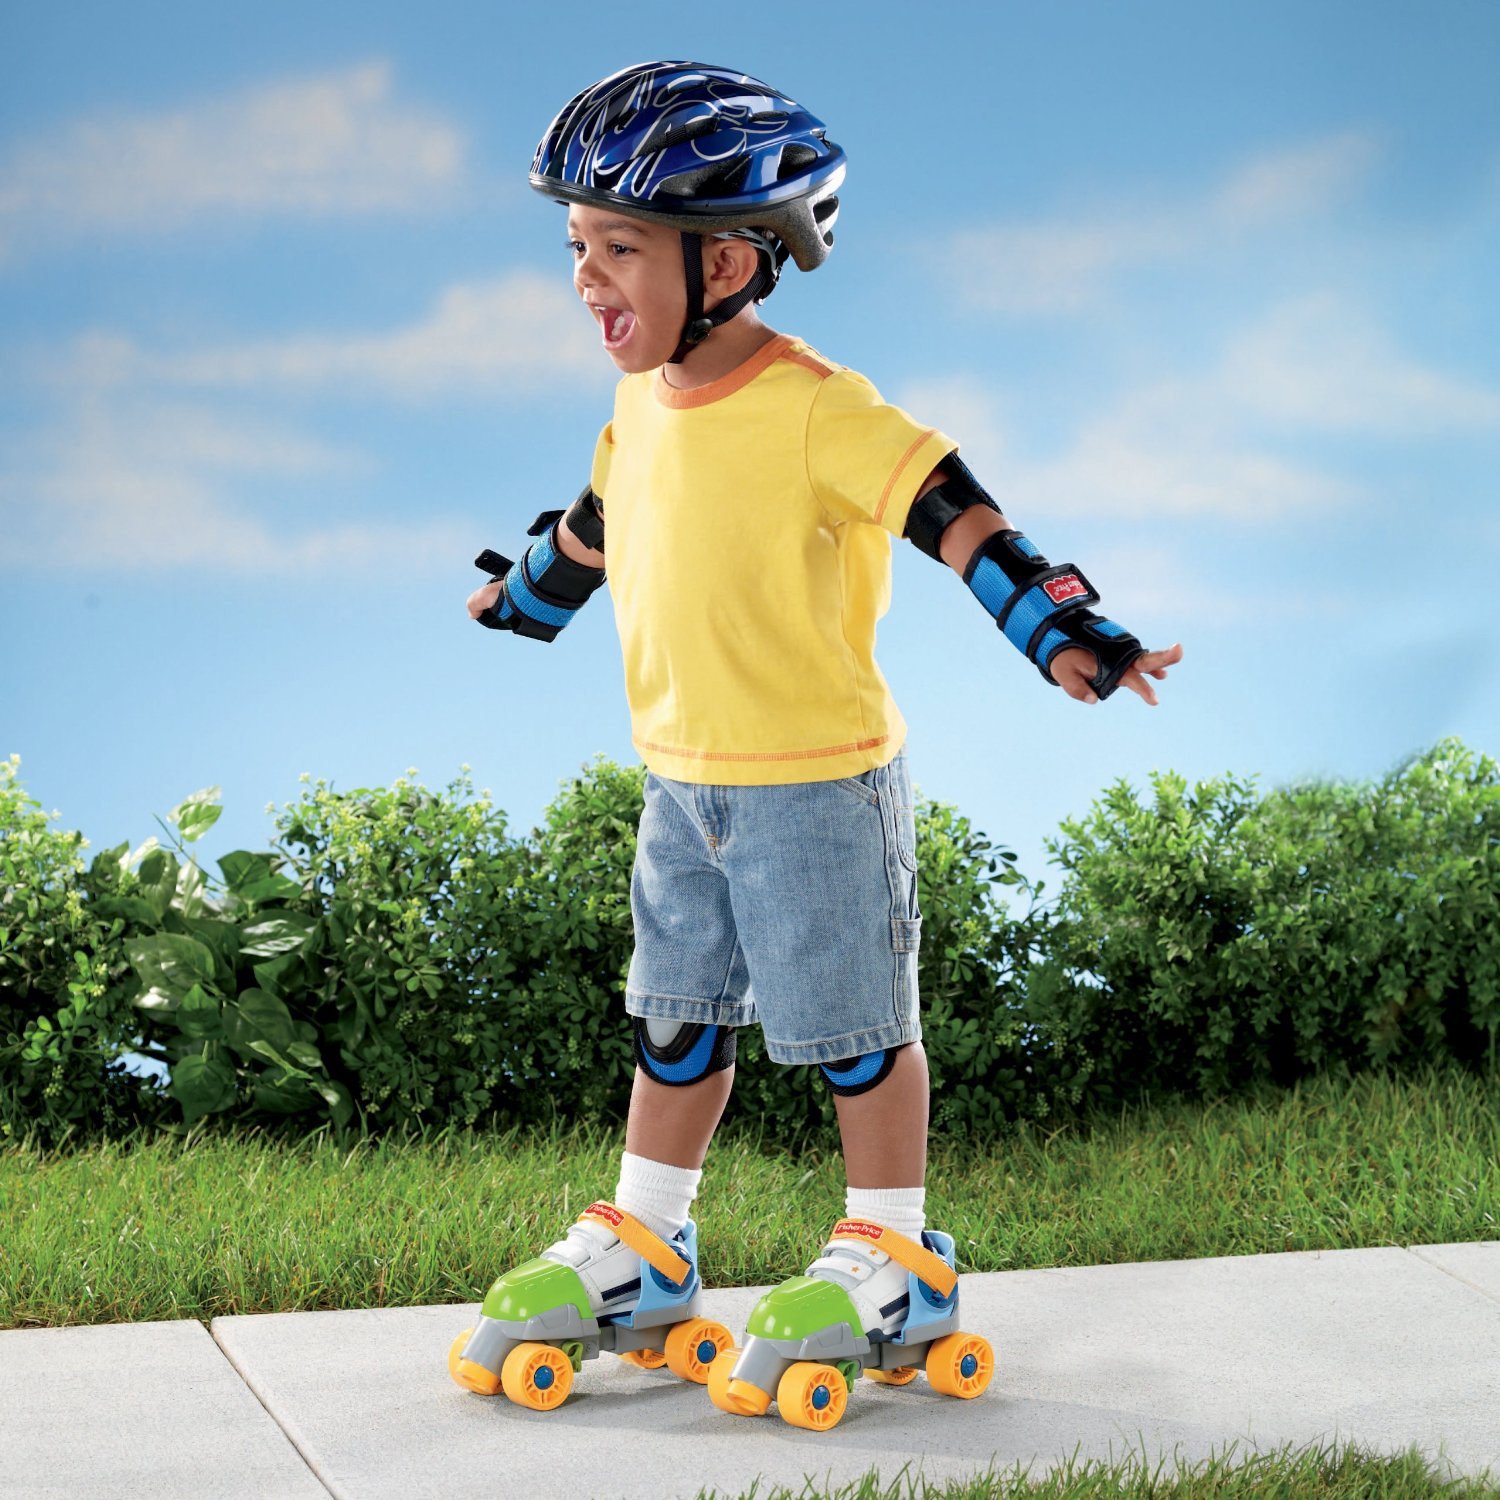 FisherPrice Grow with Me Roller Skates Only 13.49 (Reg